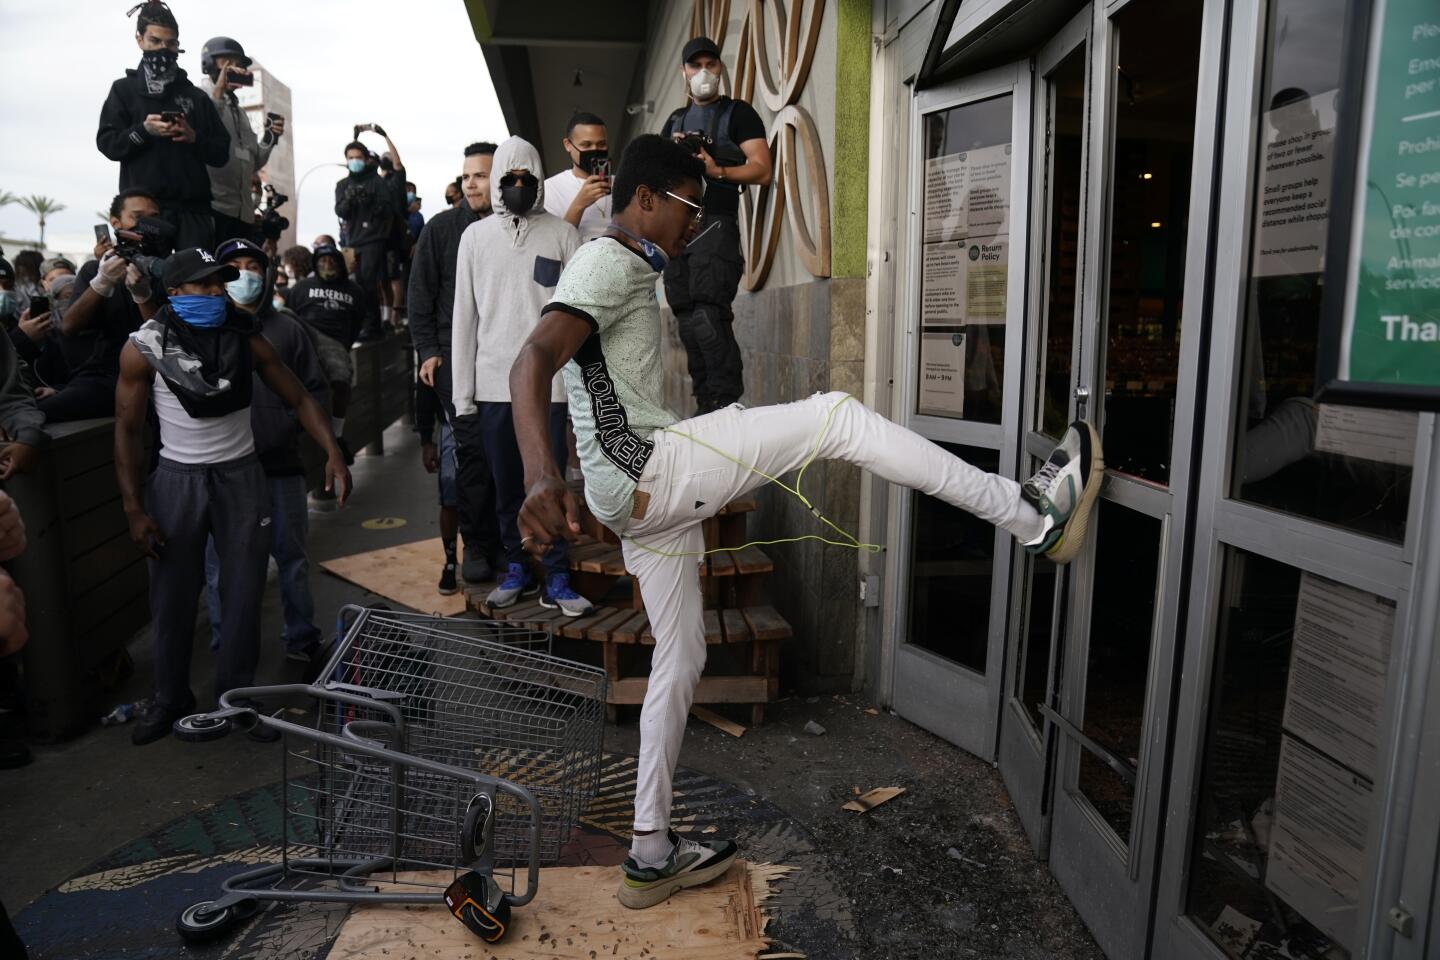 A person kicks in the door of a Whole Foods Market in the Fairfax District of Lo Angeles on Saturday